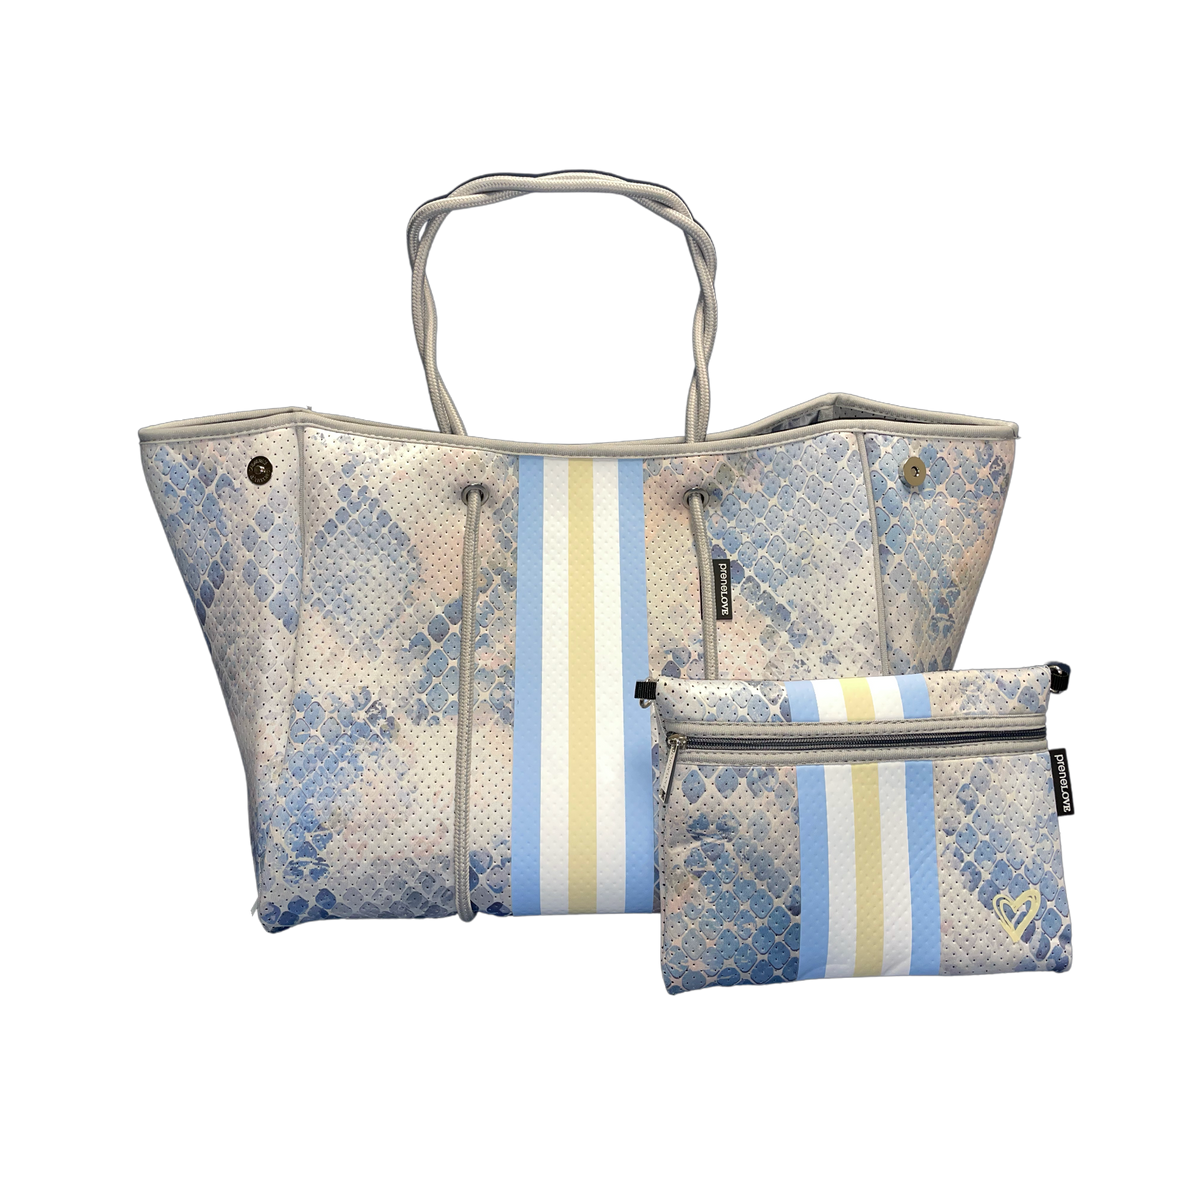 PreneLove tote bag and wristlet in Georgina. Pastel blue snake print with stripe down the center